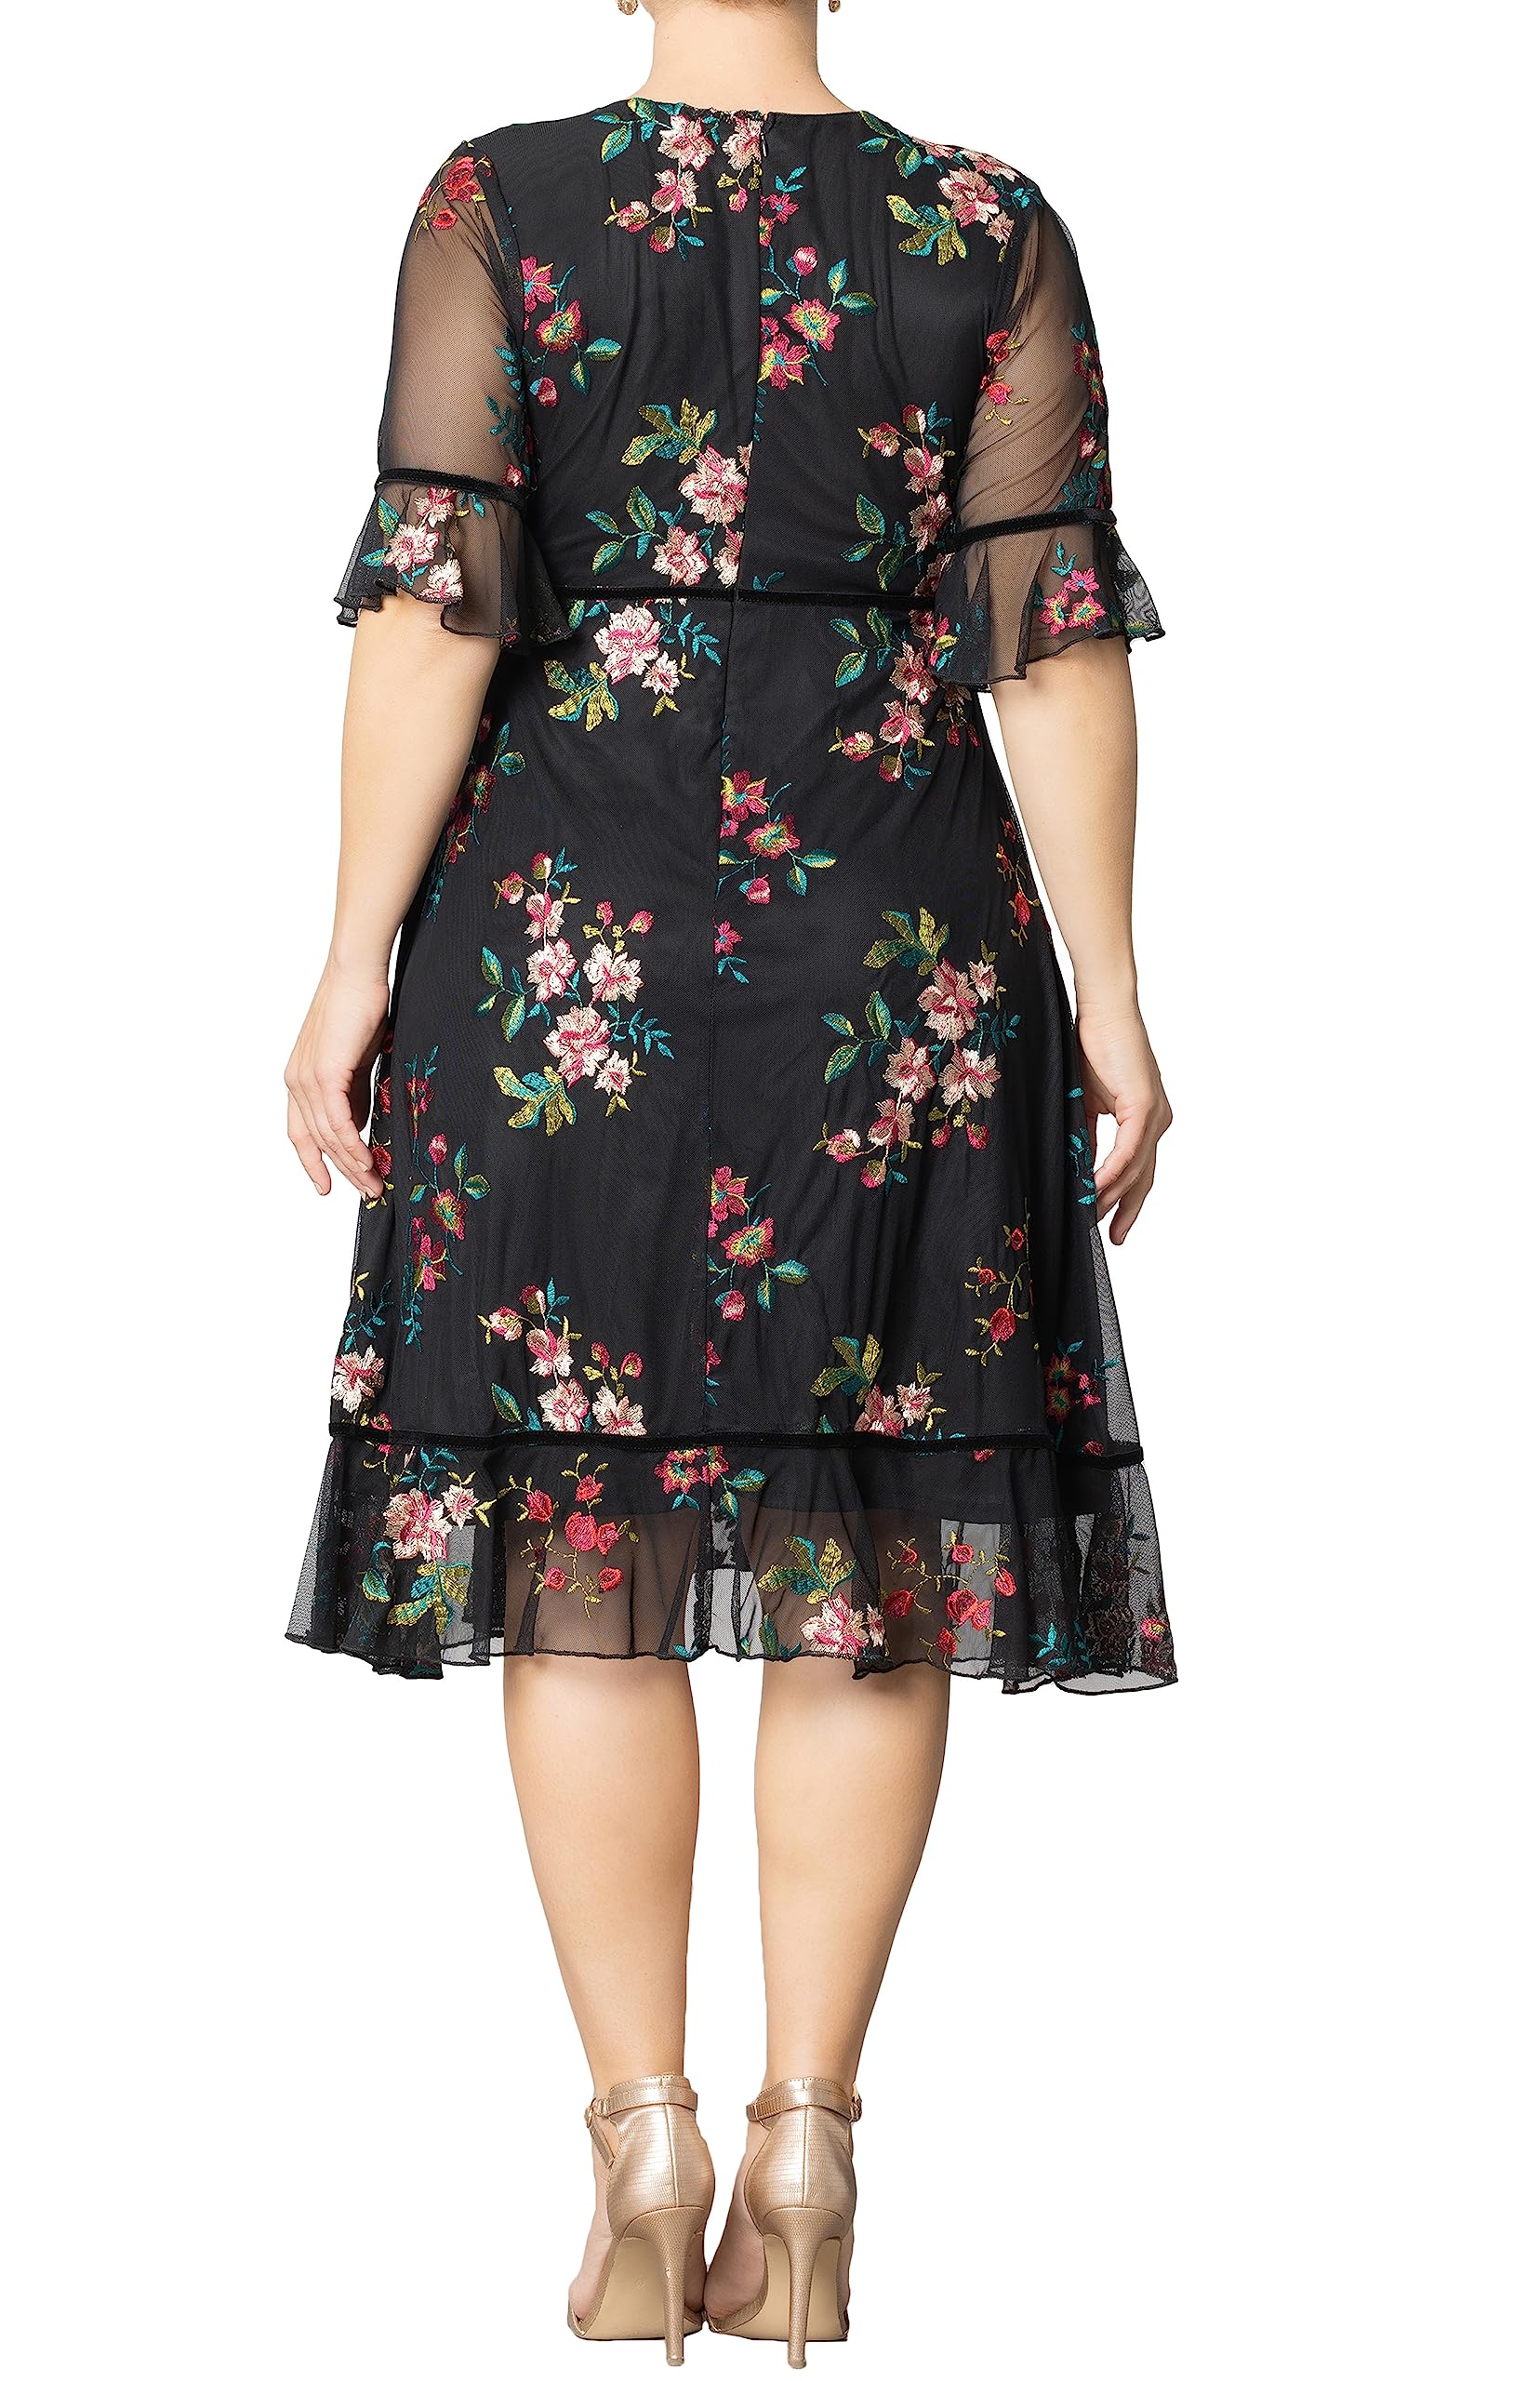 Kiyonna Plus Size Wildflower Midi Embroidered Cocktail Dress | Formal Dress for Party, Wedding Guest, or Special Occasion